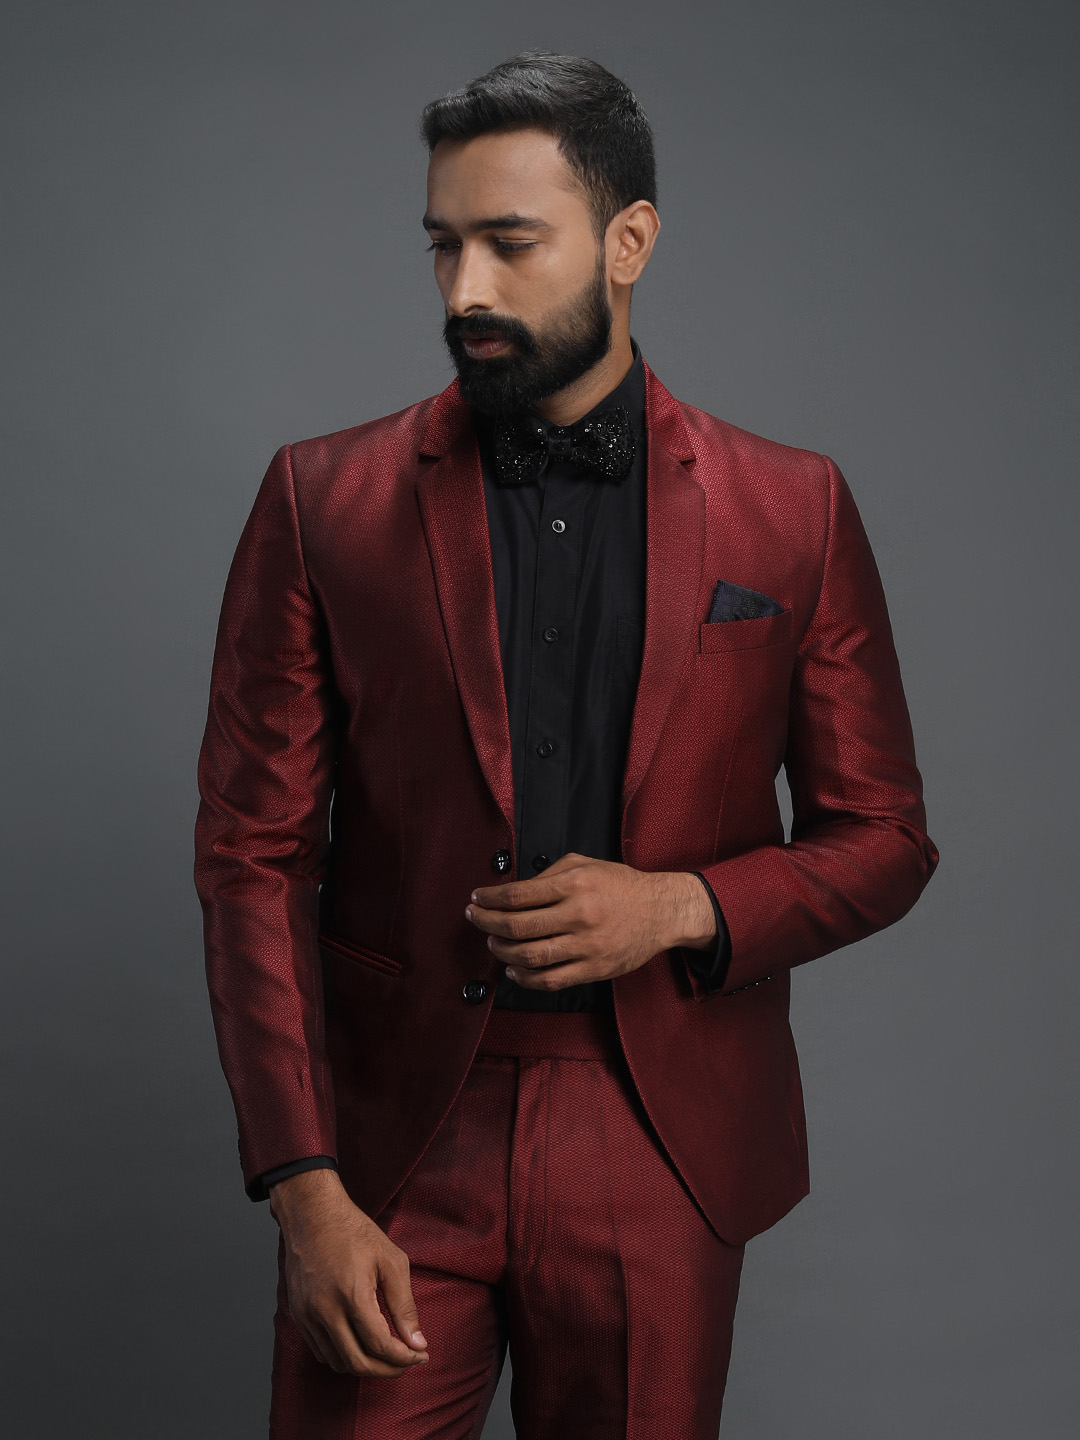 Rent/Buy Bright Red 2 Piece Suit | Home Trial | Free Delivery | CandidKnots